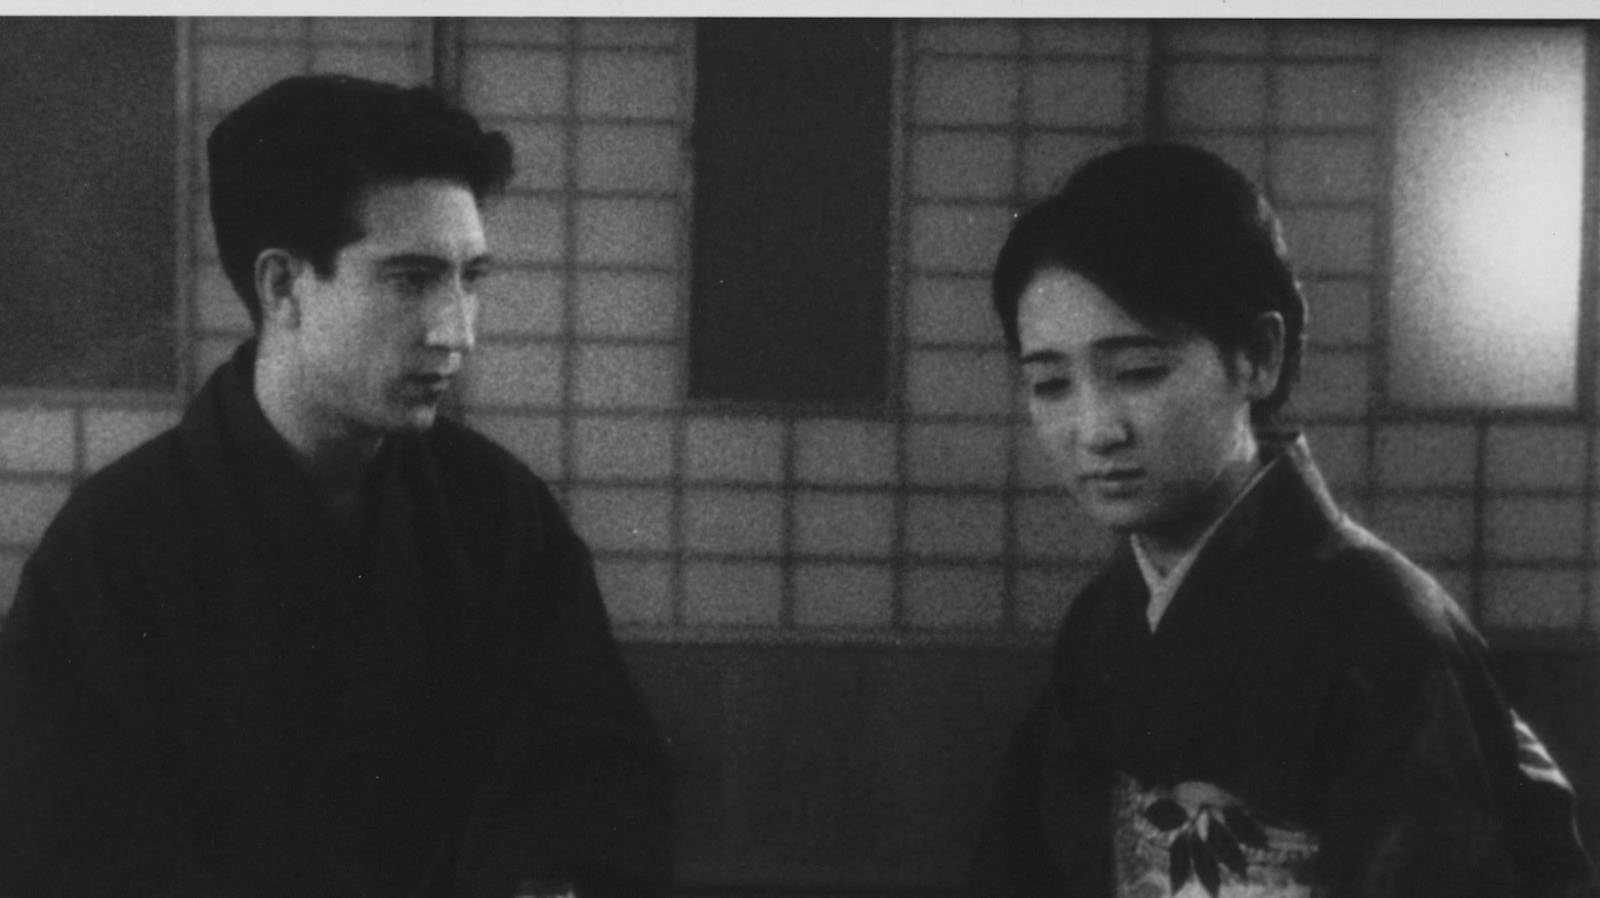 black and white image of a young Japanese couple, the man looking down at a woman who looks away, both sitting in front of a traditional screen